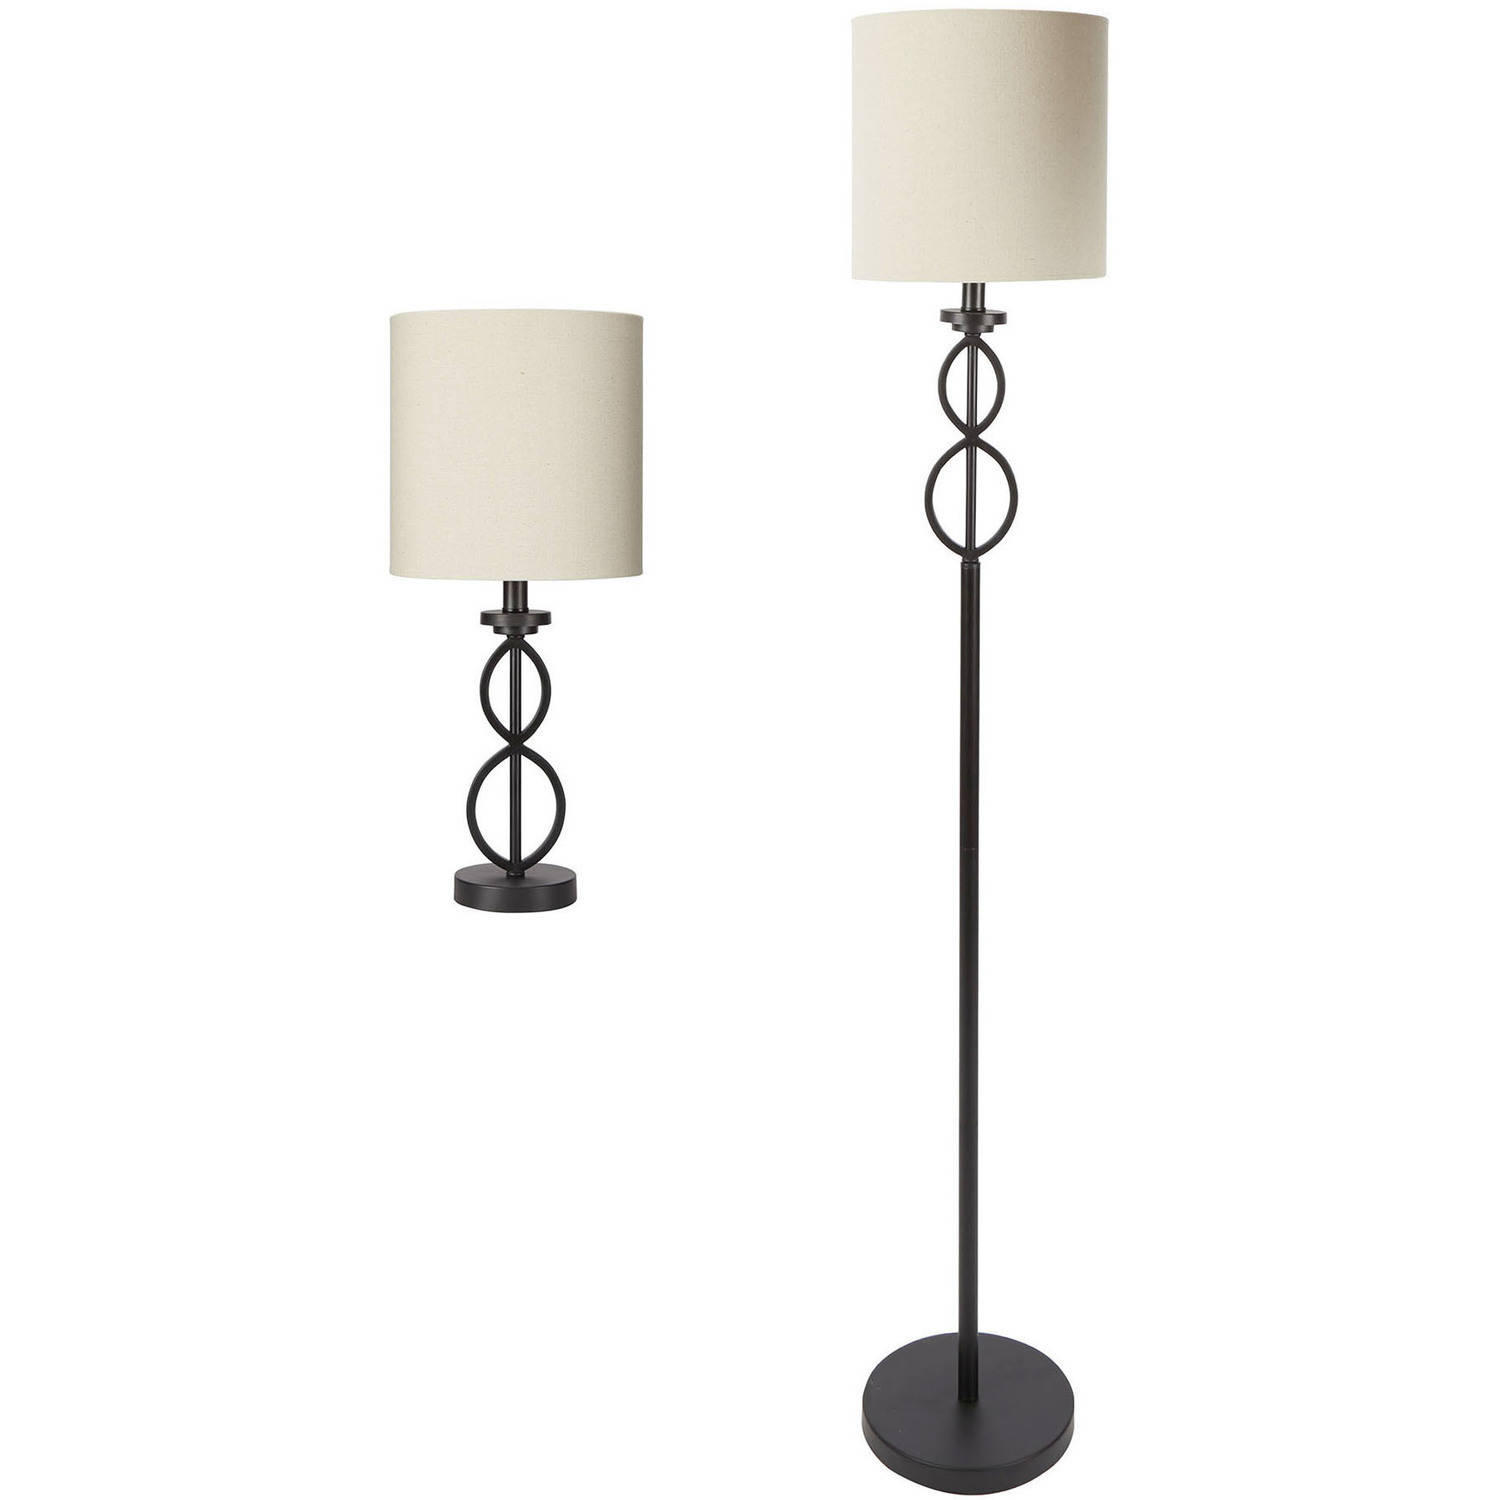 Mainstays Table and Floor Lamp Set, Black, CFL Bulbs Included - image 1 of 5